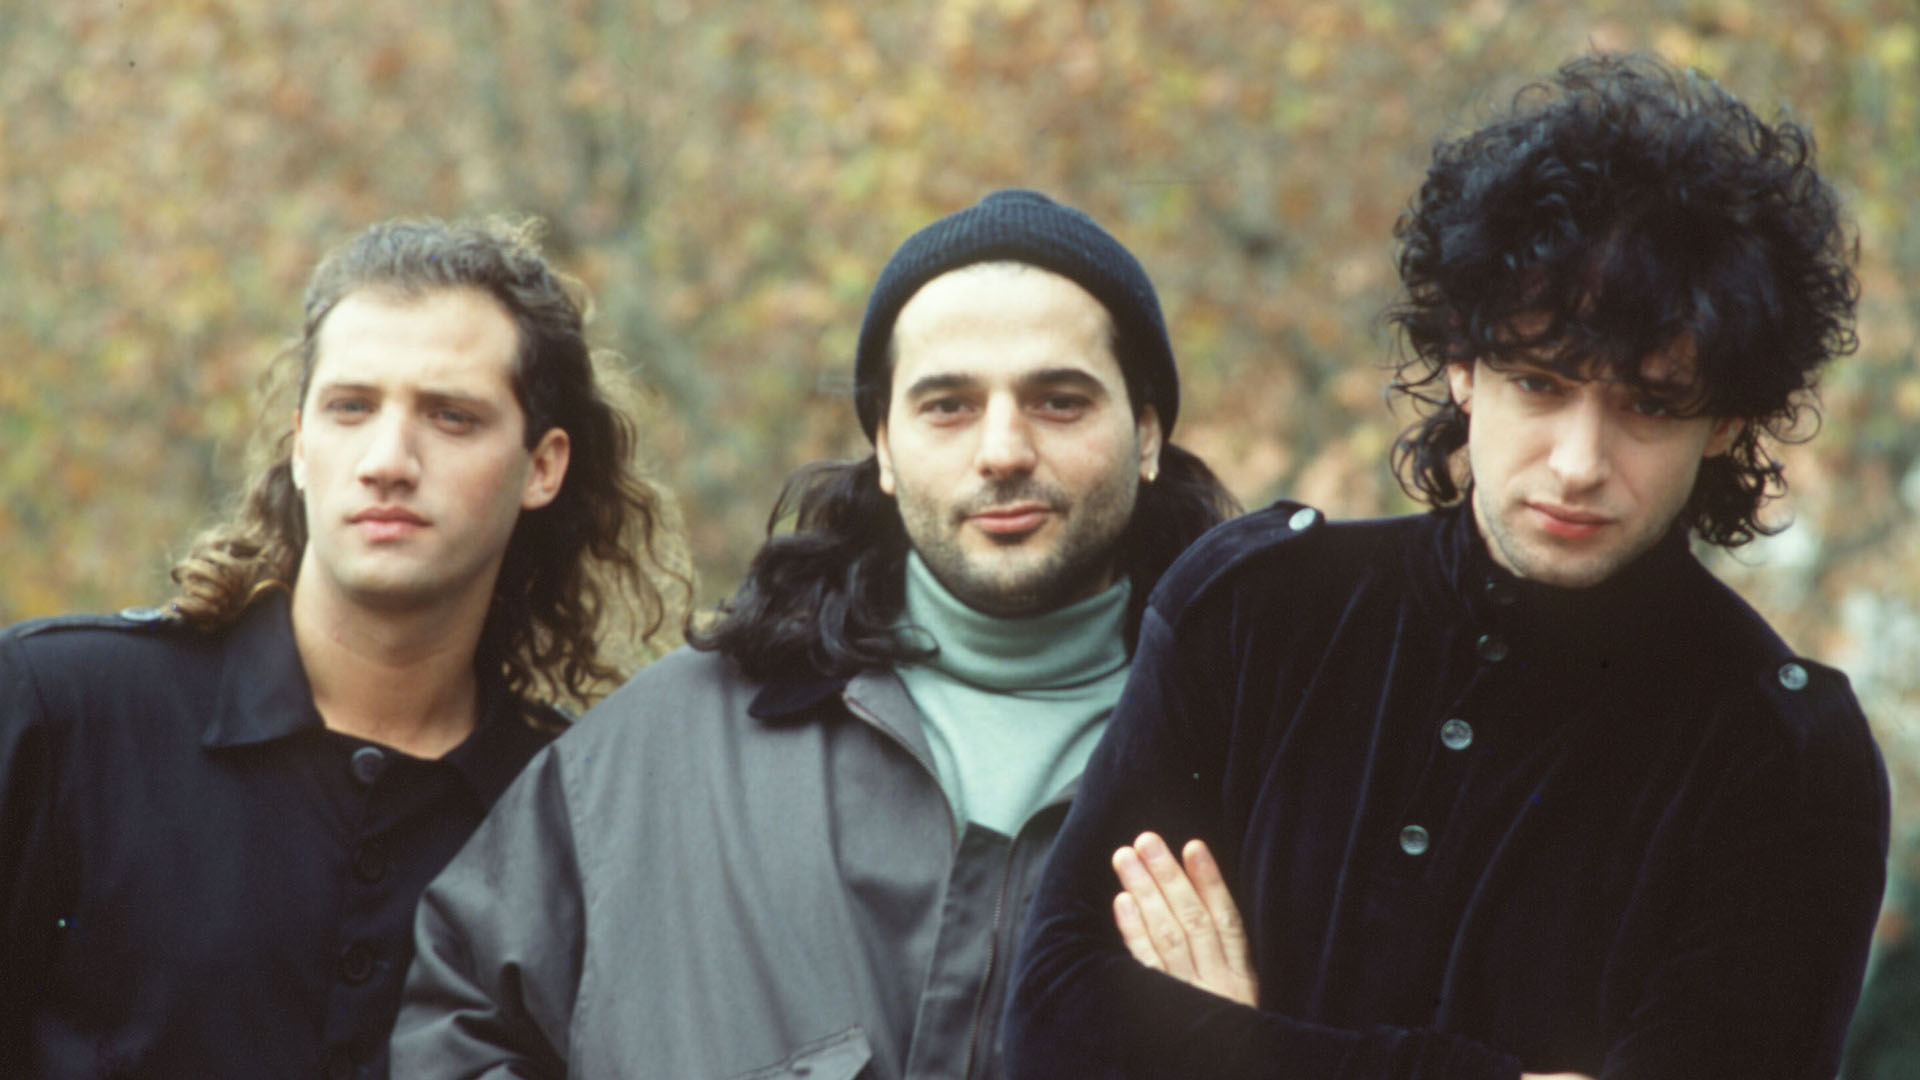 The members of Soda Stereo as young people (PHOTO NAzzzz)